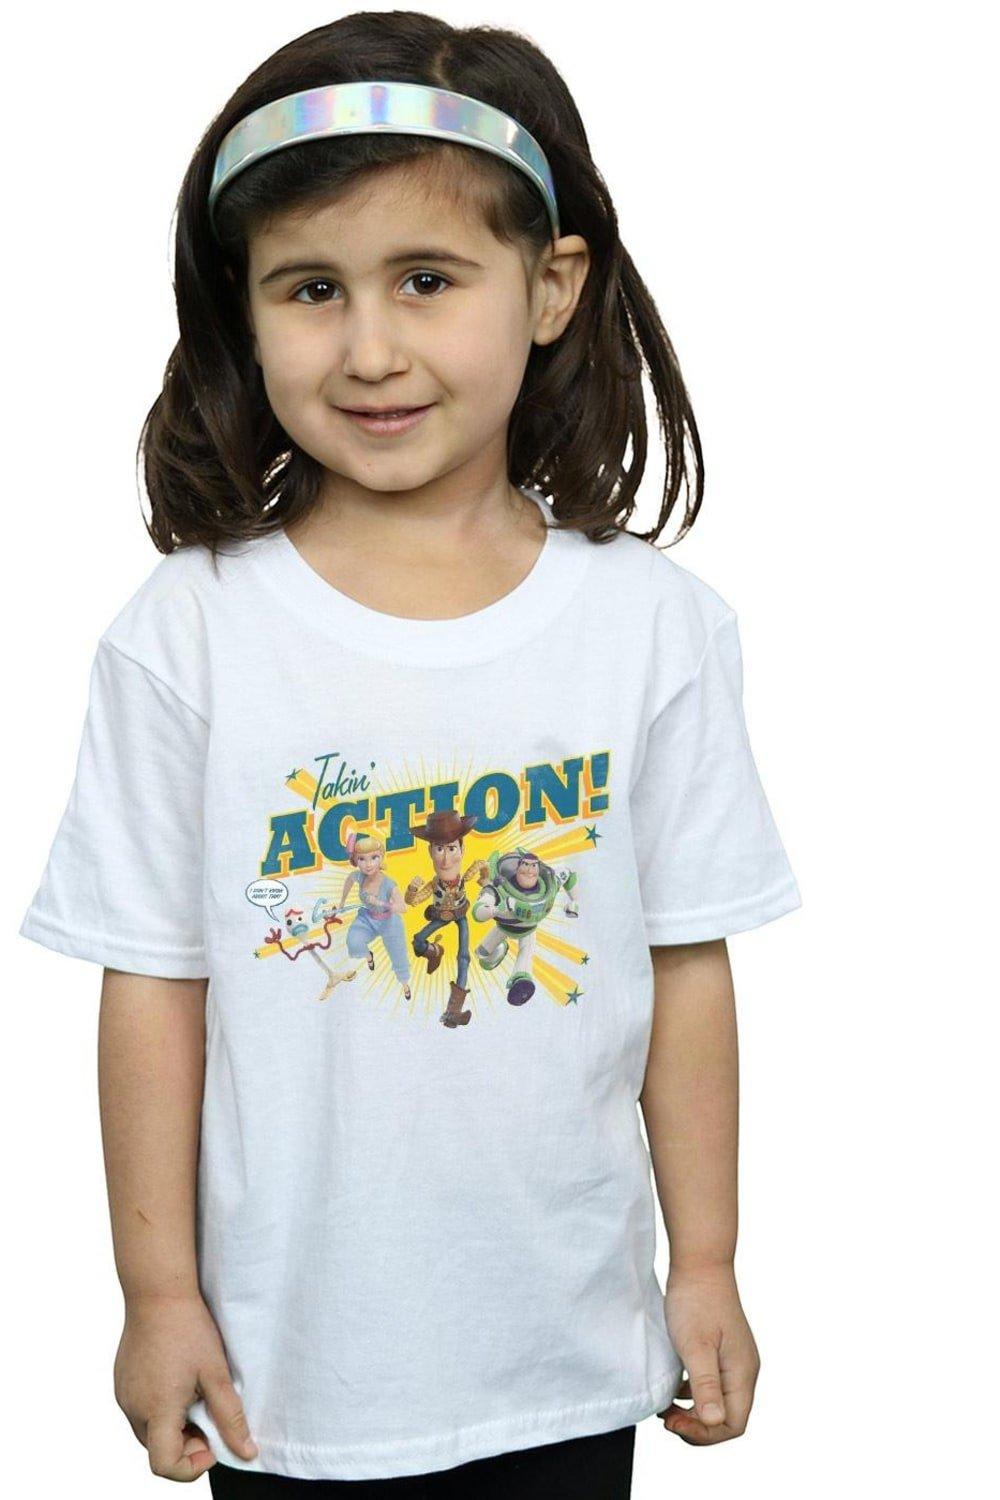 Toy Story 4 Takin’ Action Cotton T-Shirt